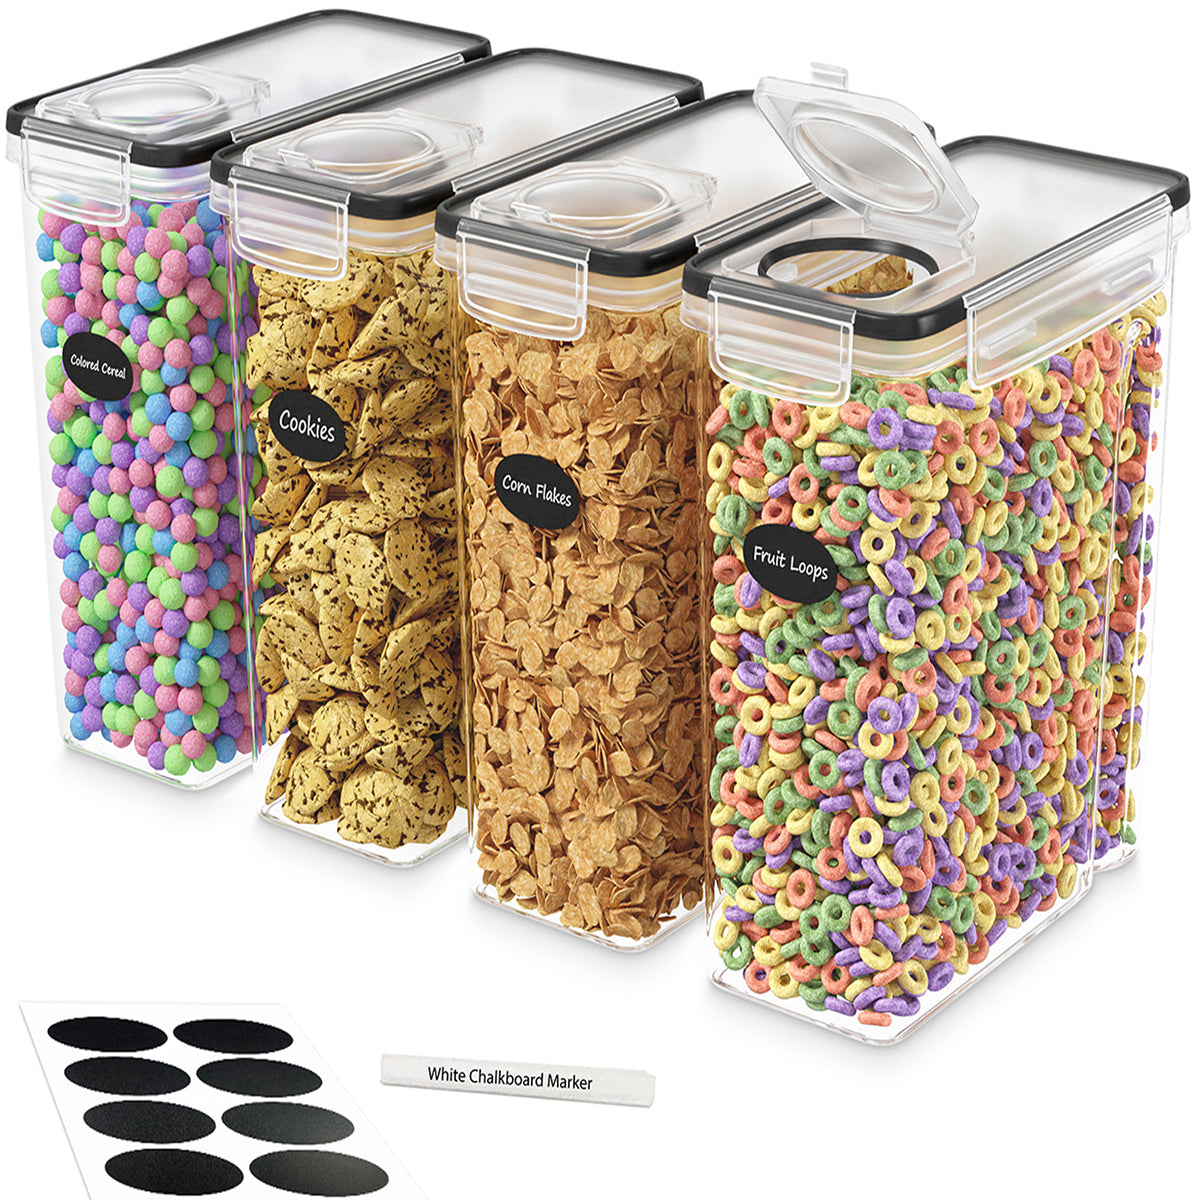 Airtight Food Storage Containers with Lids Plastic Dry Food Canisters for  Cereal Flour Sugar Kitchen Pantry Organization Storage